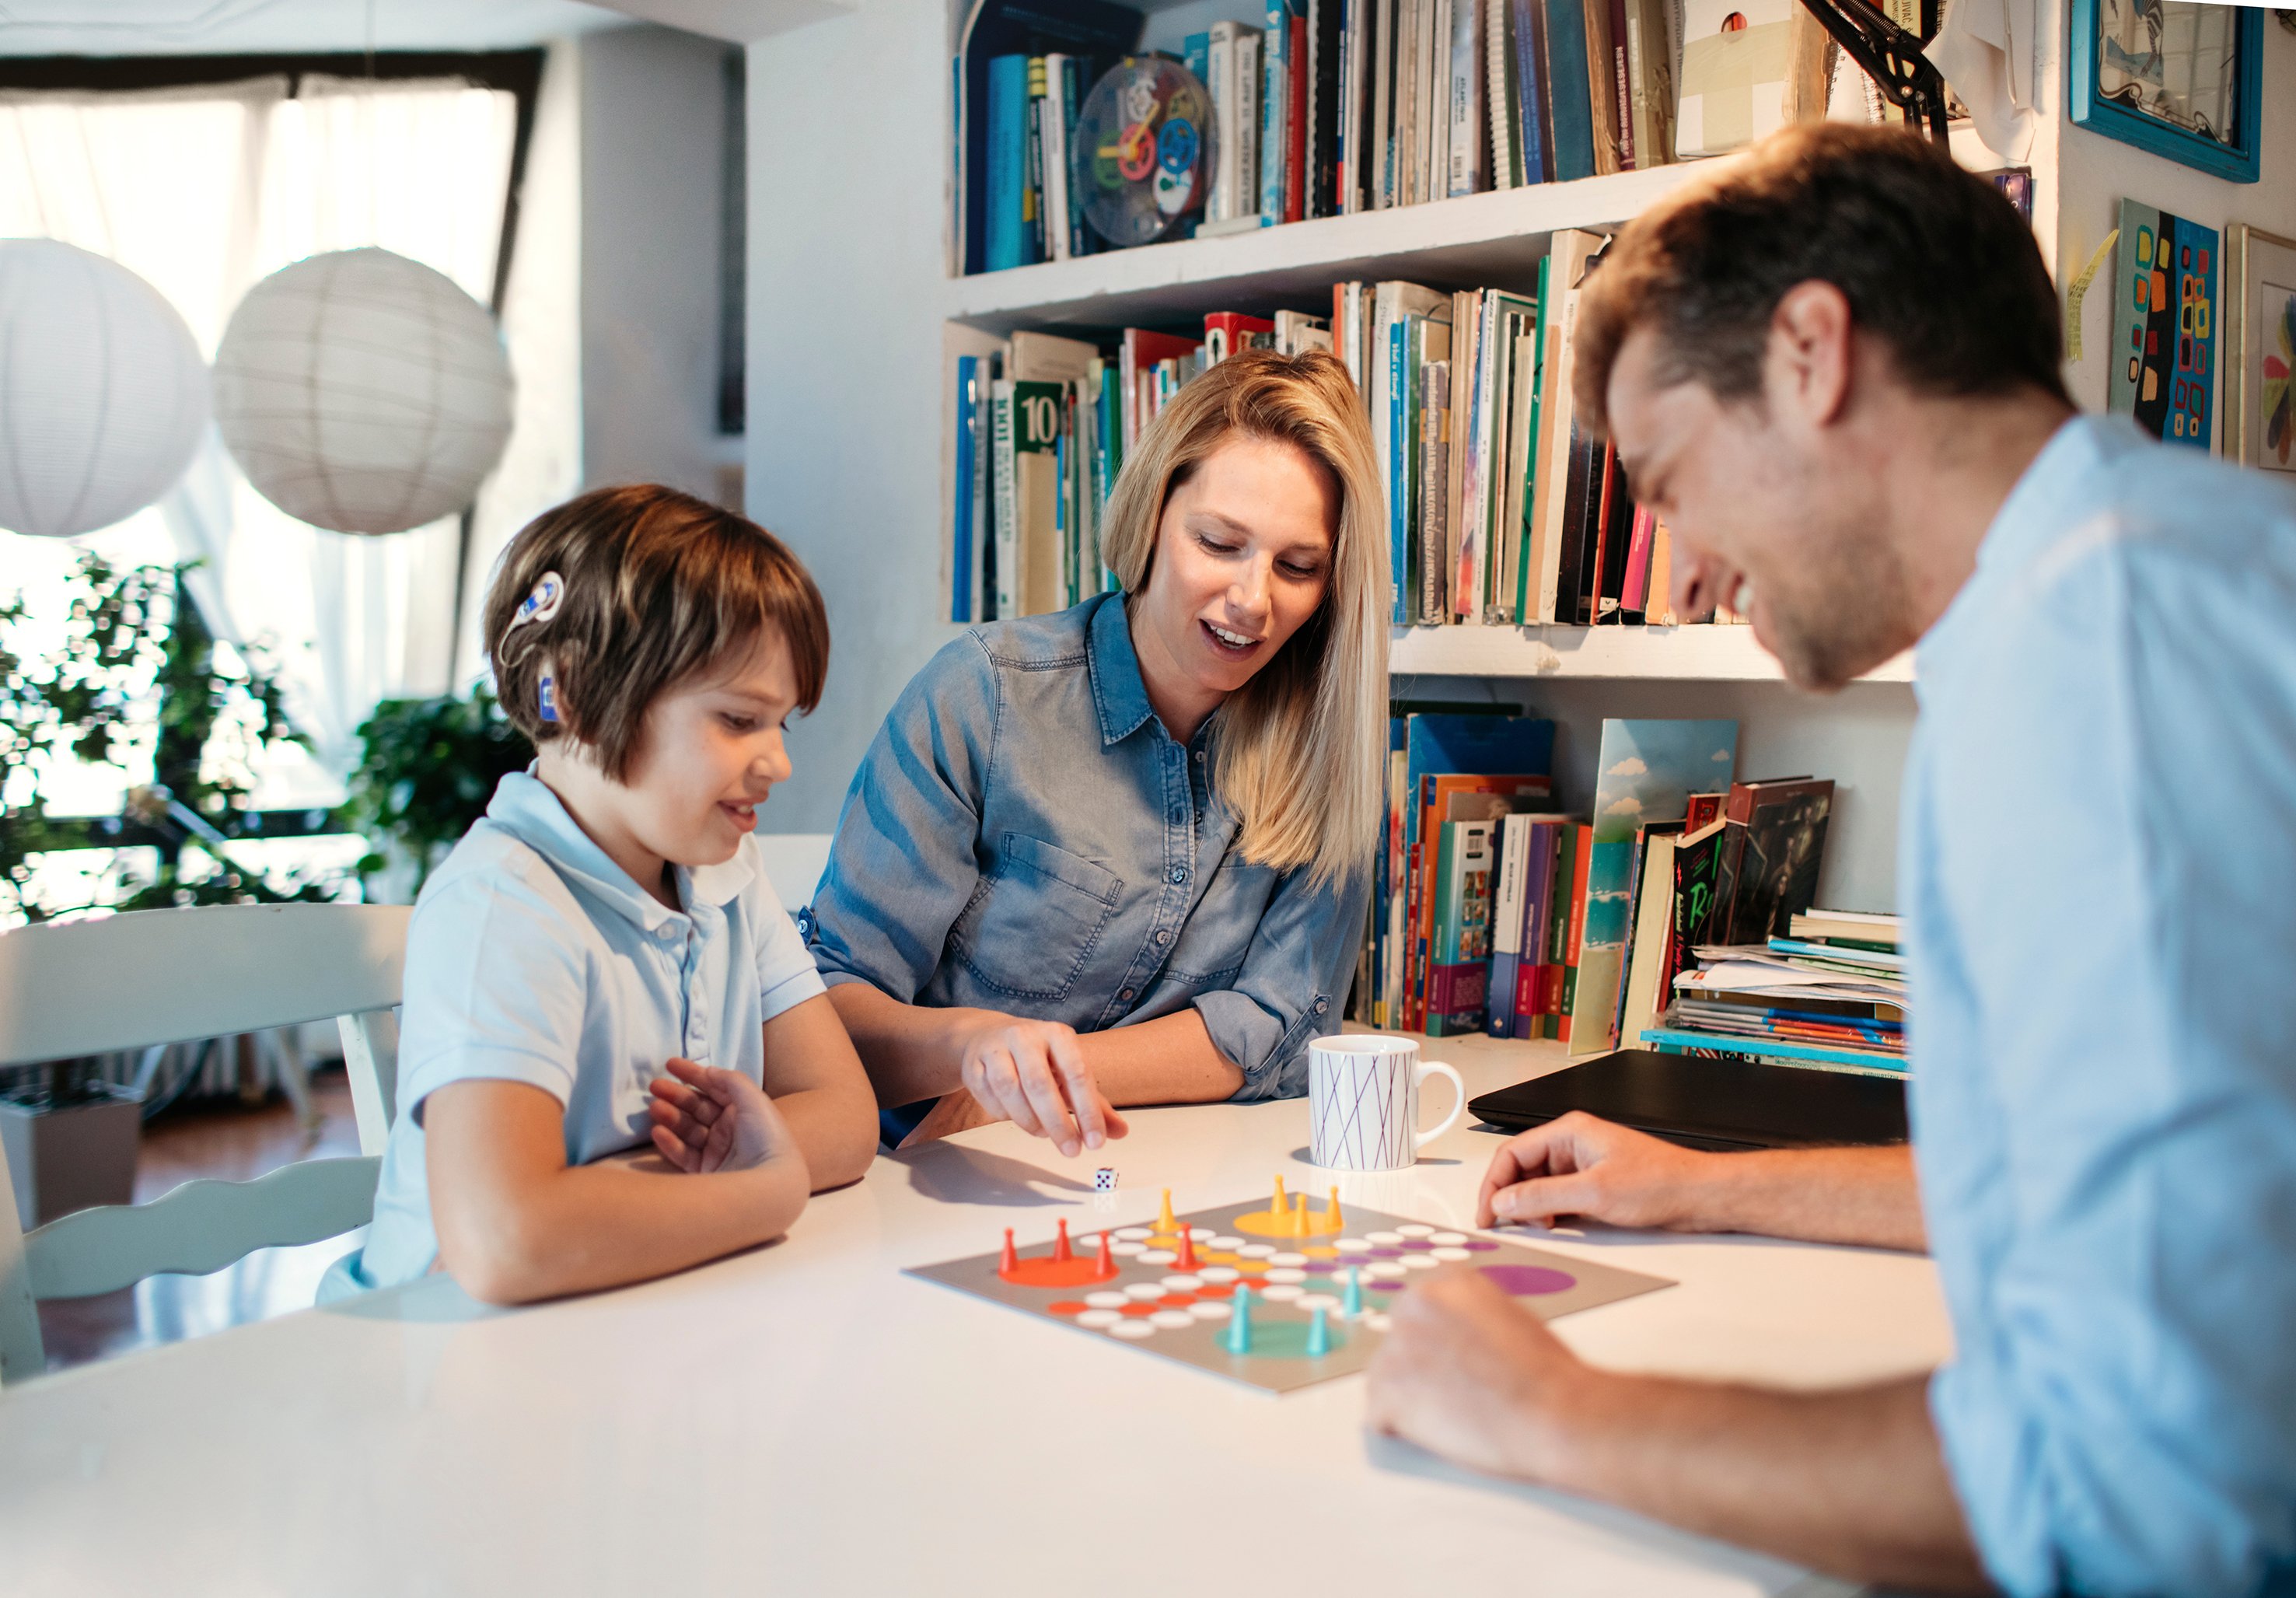 To play games like Ludo with your children at home is a recommended way for digital detox.